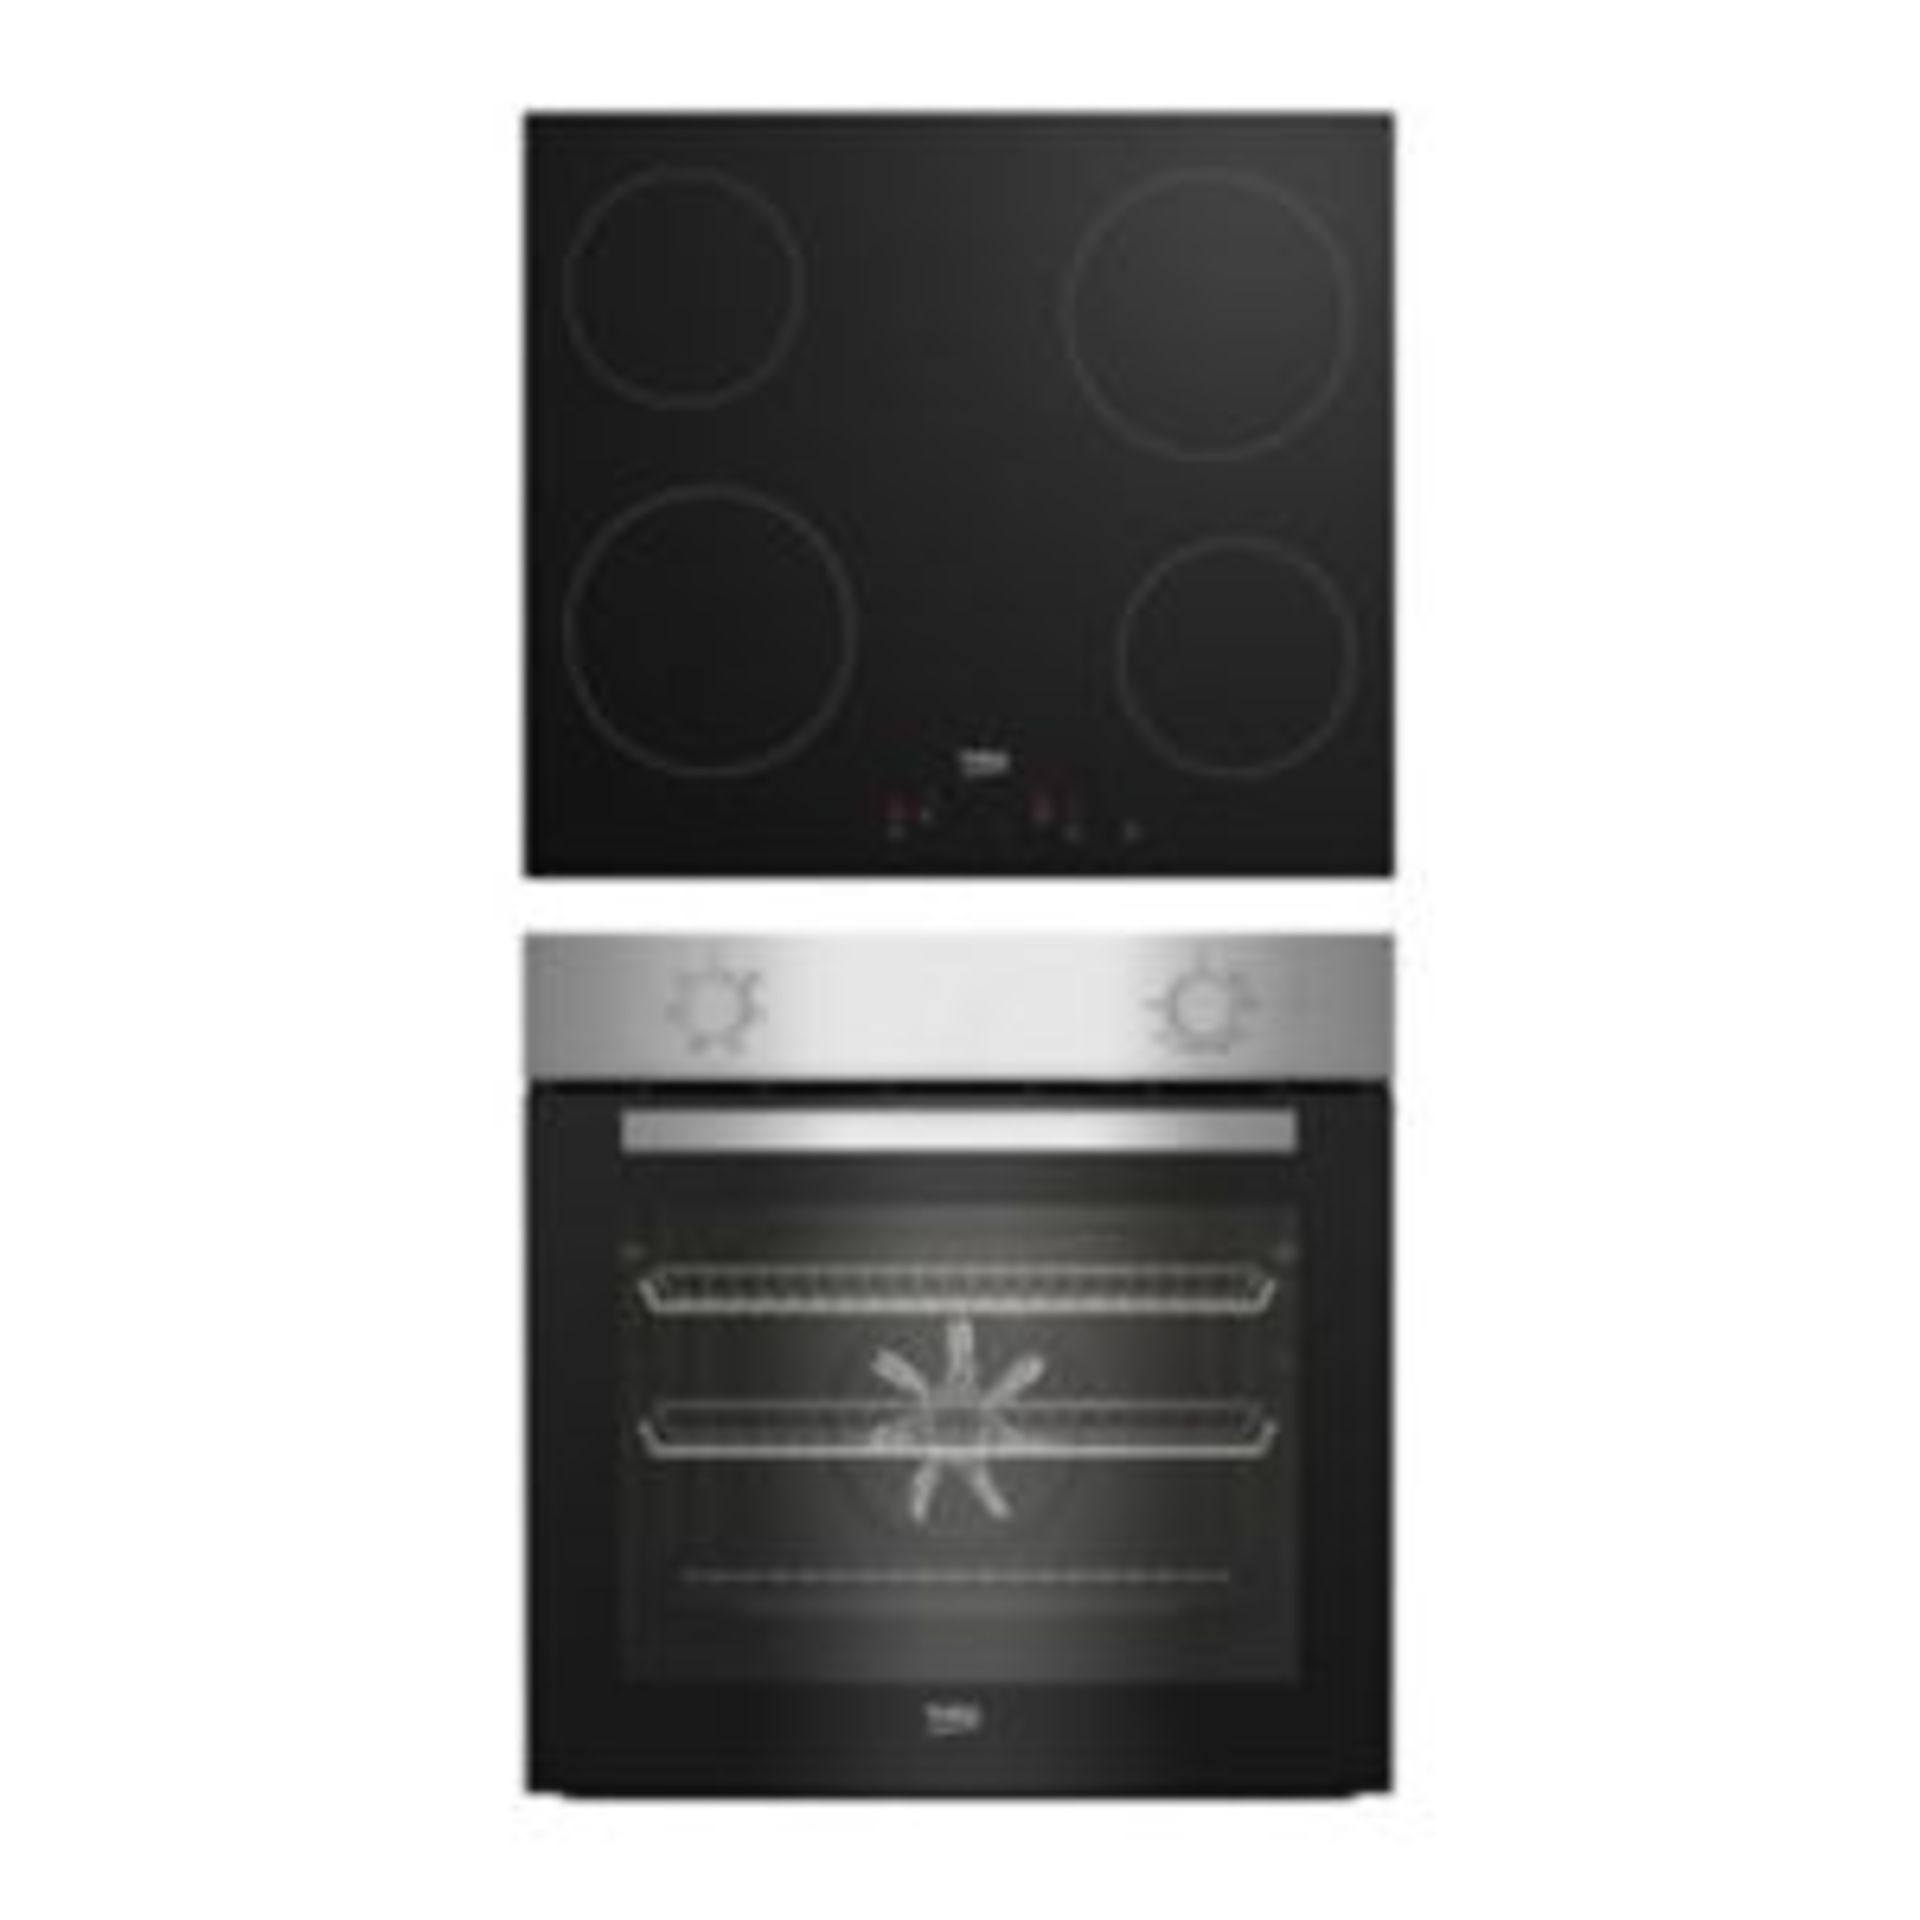 Beko Built-in Multifunction Oven & Hob Pack - Stainless Steel - ER45 *Please note this oven contains